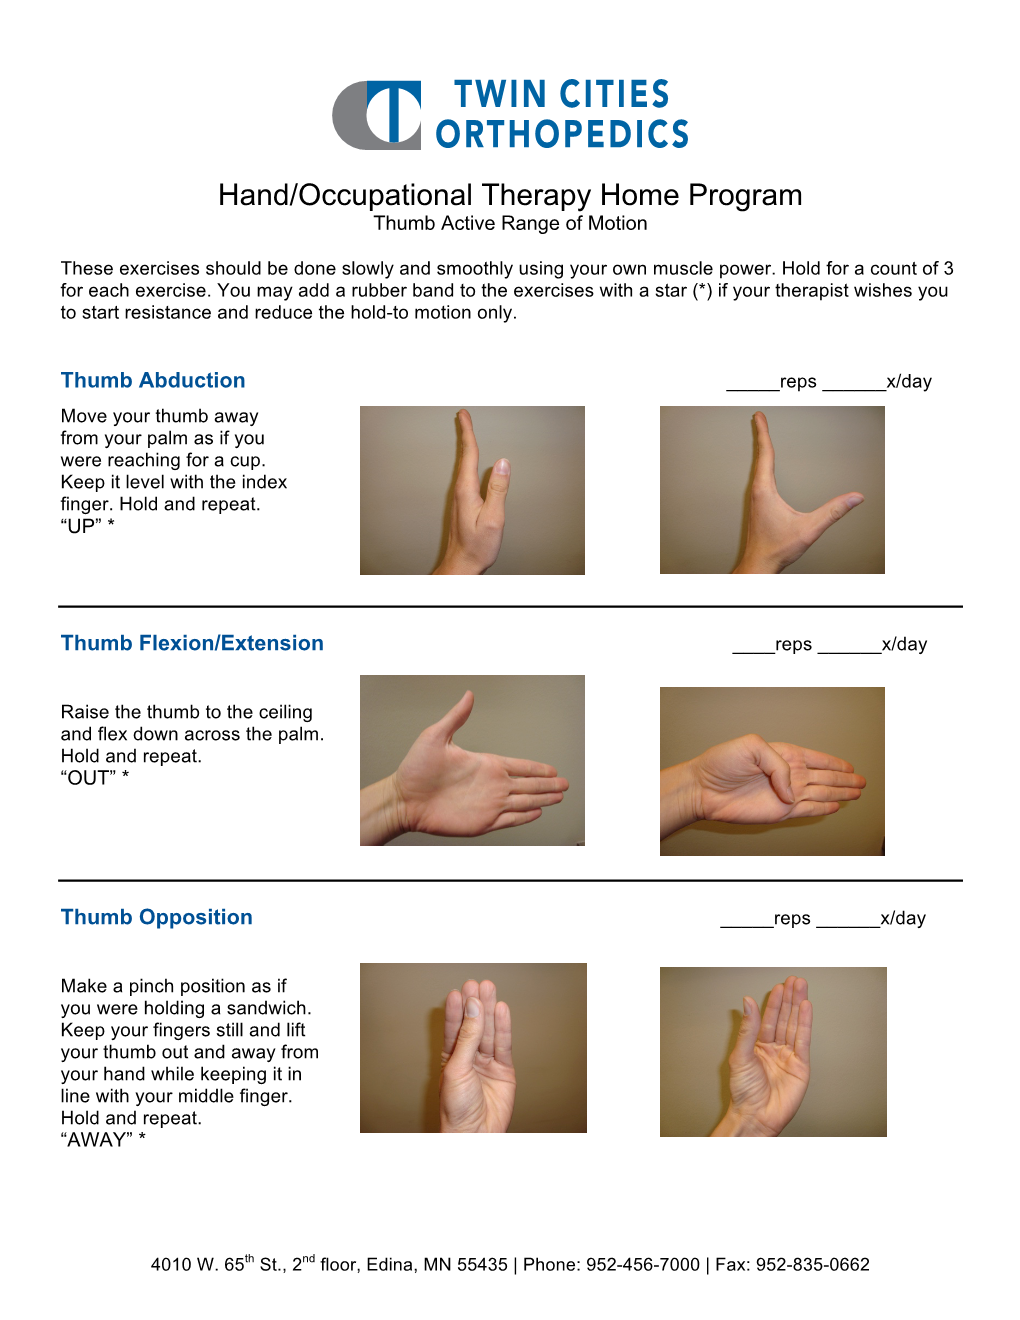 Hand/Occupational Therapy Home Program Thumb Active Range of Motion